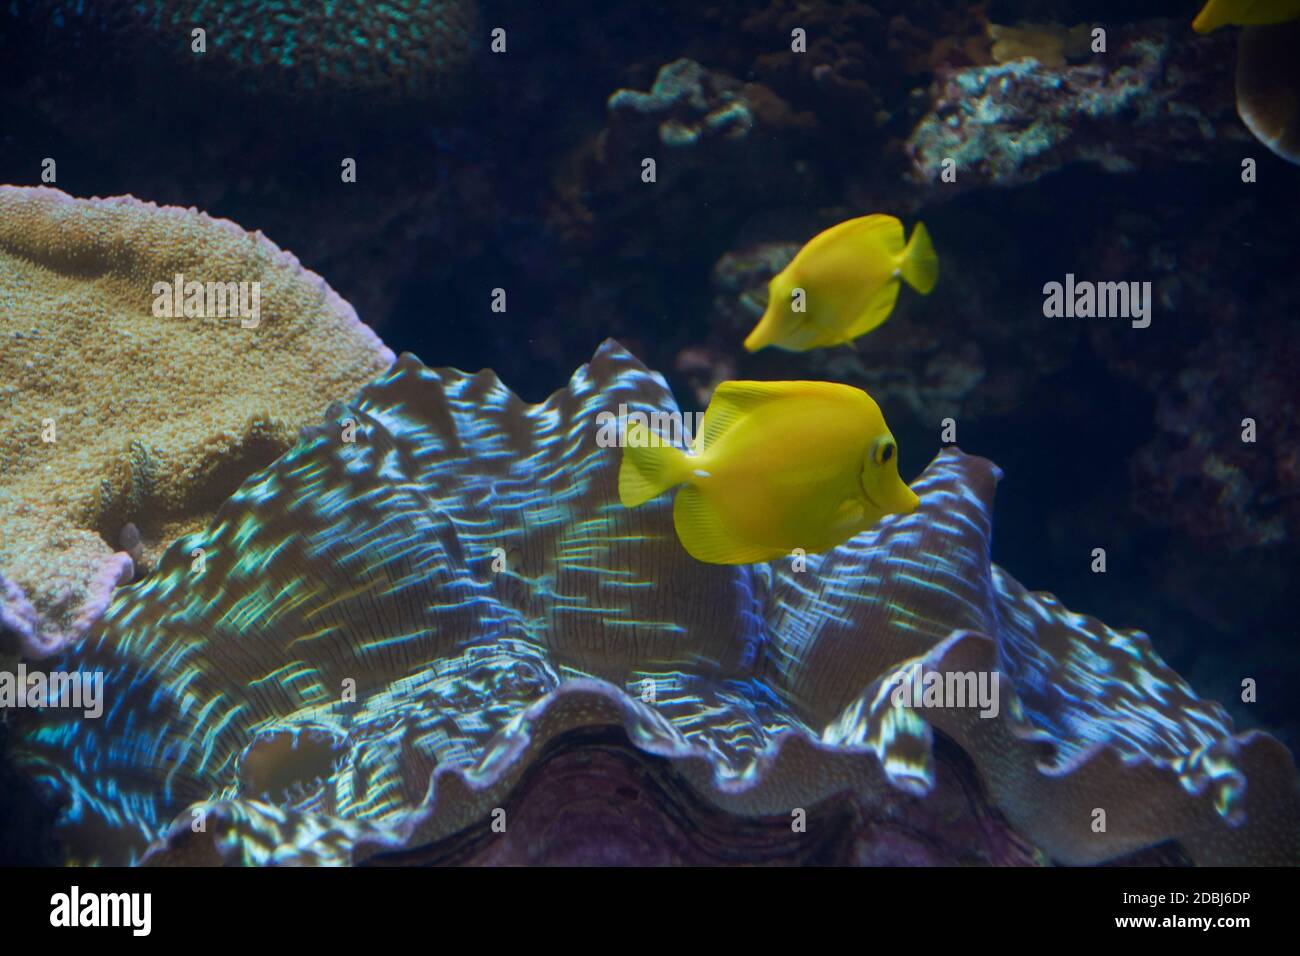 Two small yellow fish in the ocean, two,, shiny, rocks, algae Stock Photo